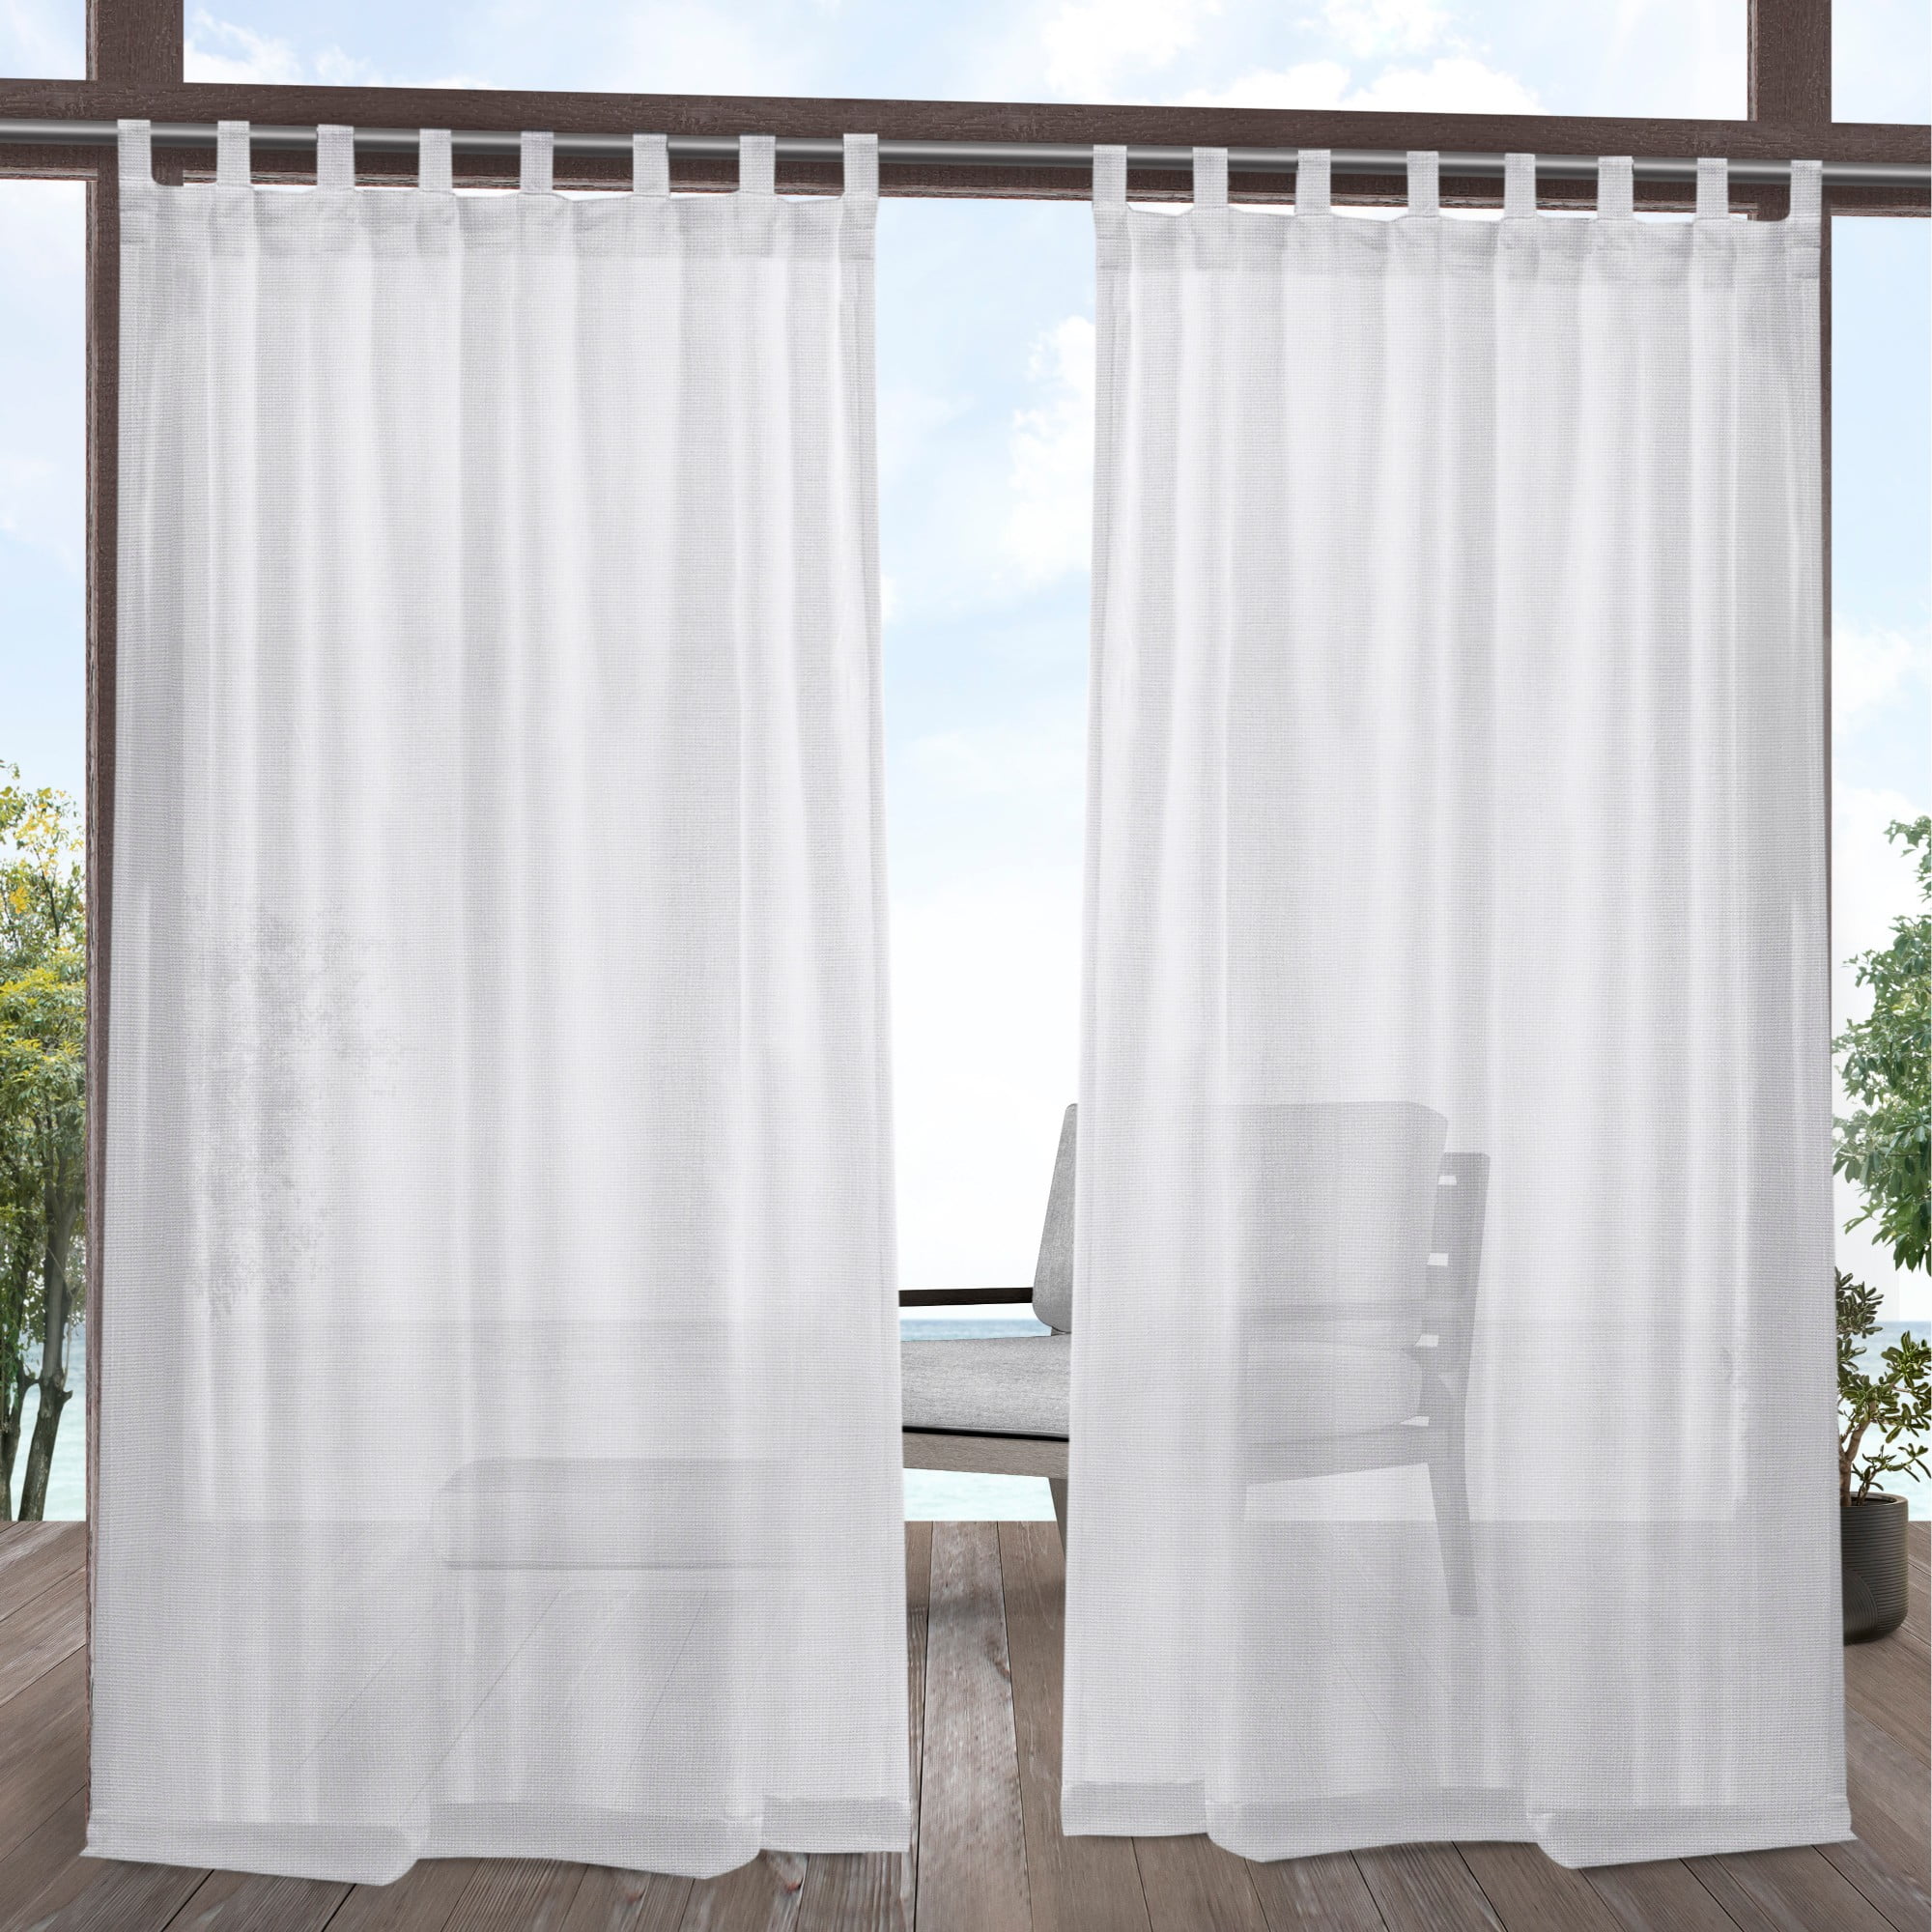 LIFONDER White Patio Sheer Curtains 2 Panels Indoor Outdoor Grommet Waterproof Golden Thread Linen Look Sheer Drapes/Shades/Blinds for Patio Privacy with 2 Tiebacks White 52 x 108 Inch